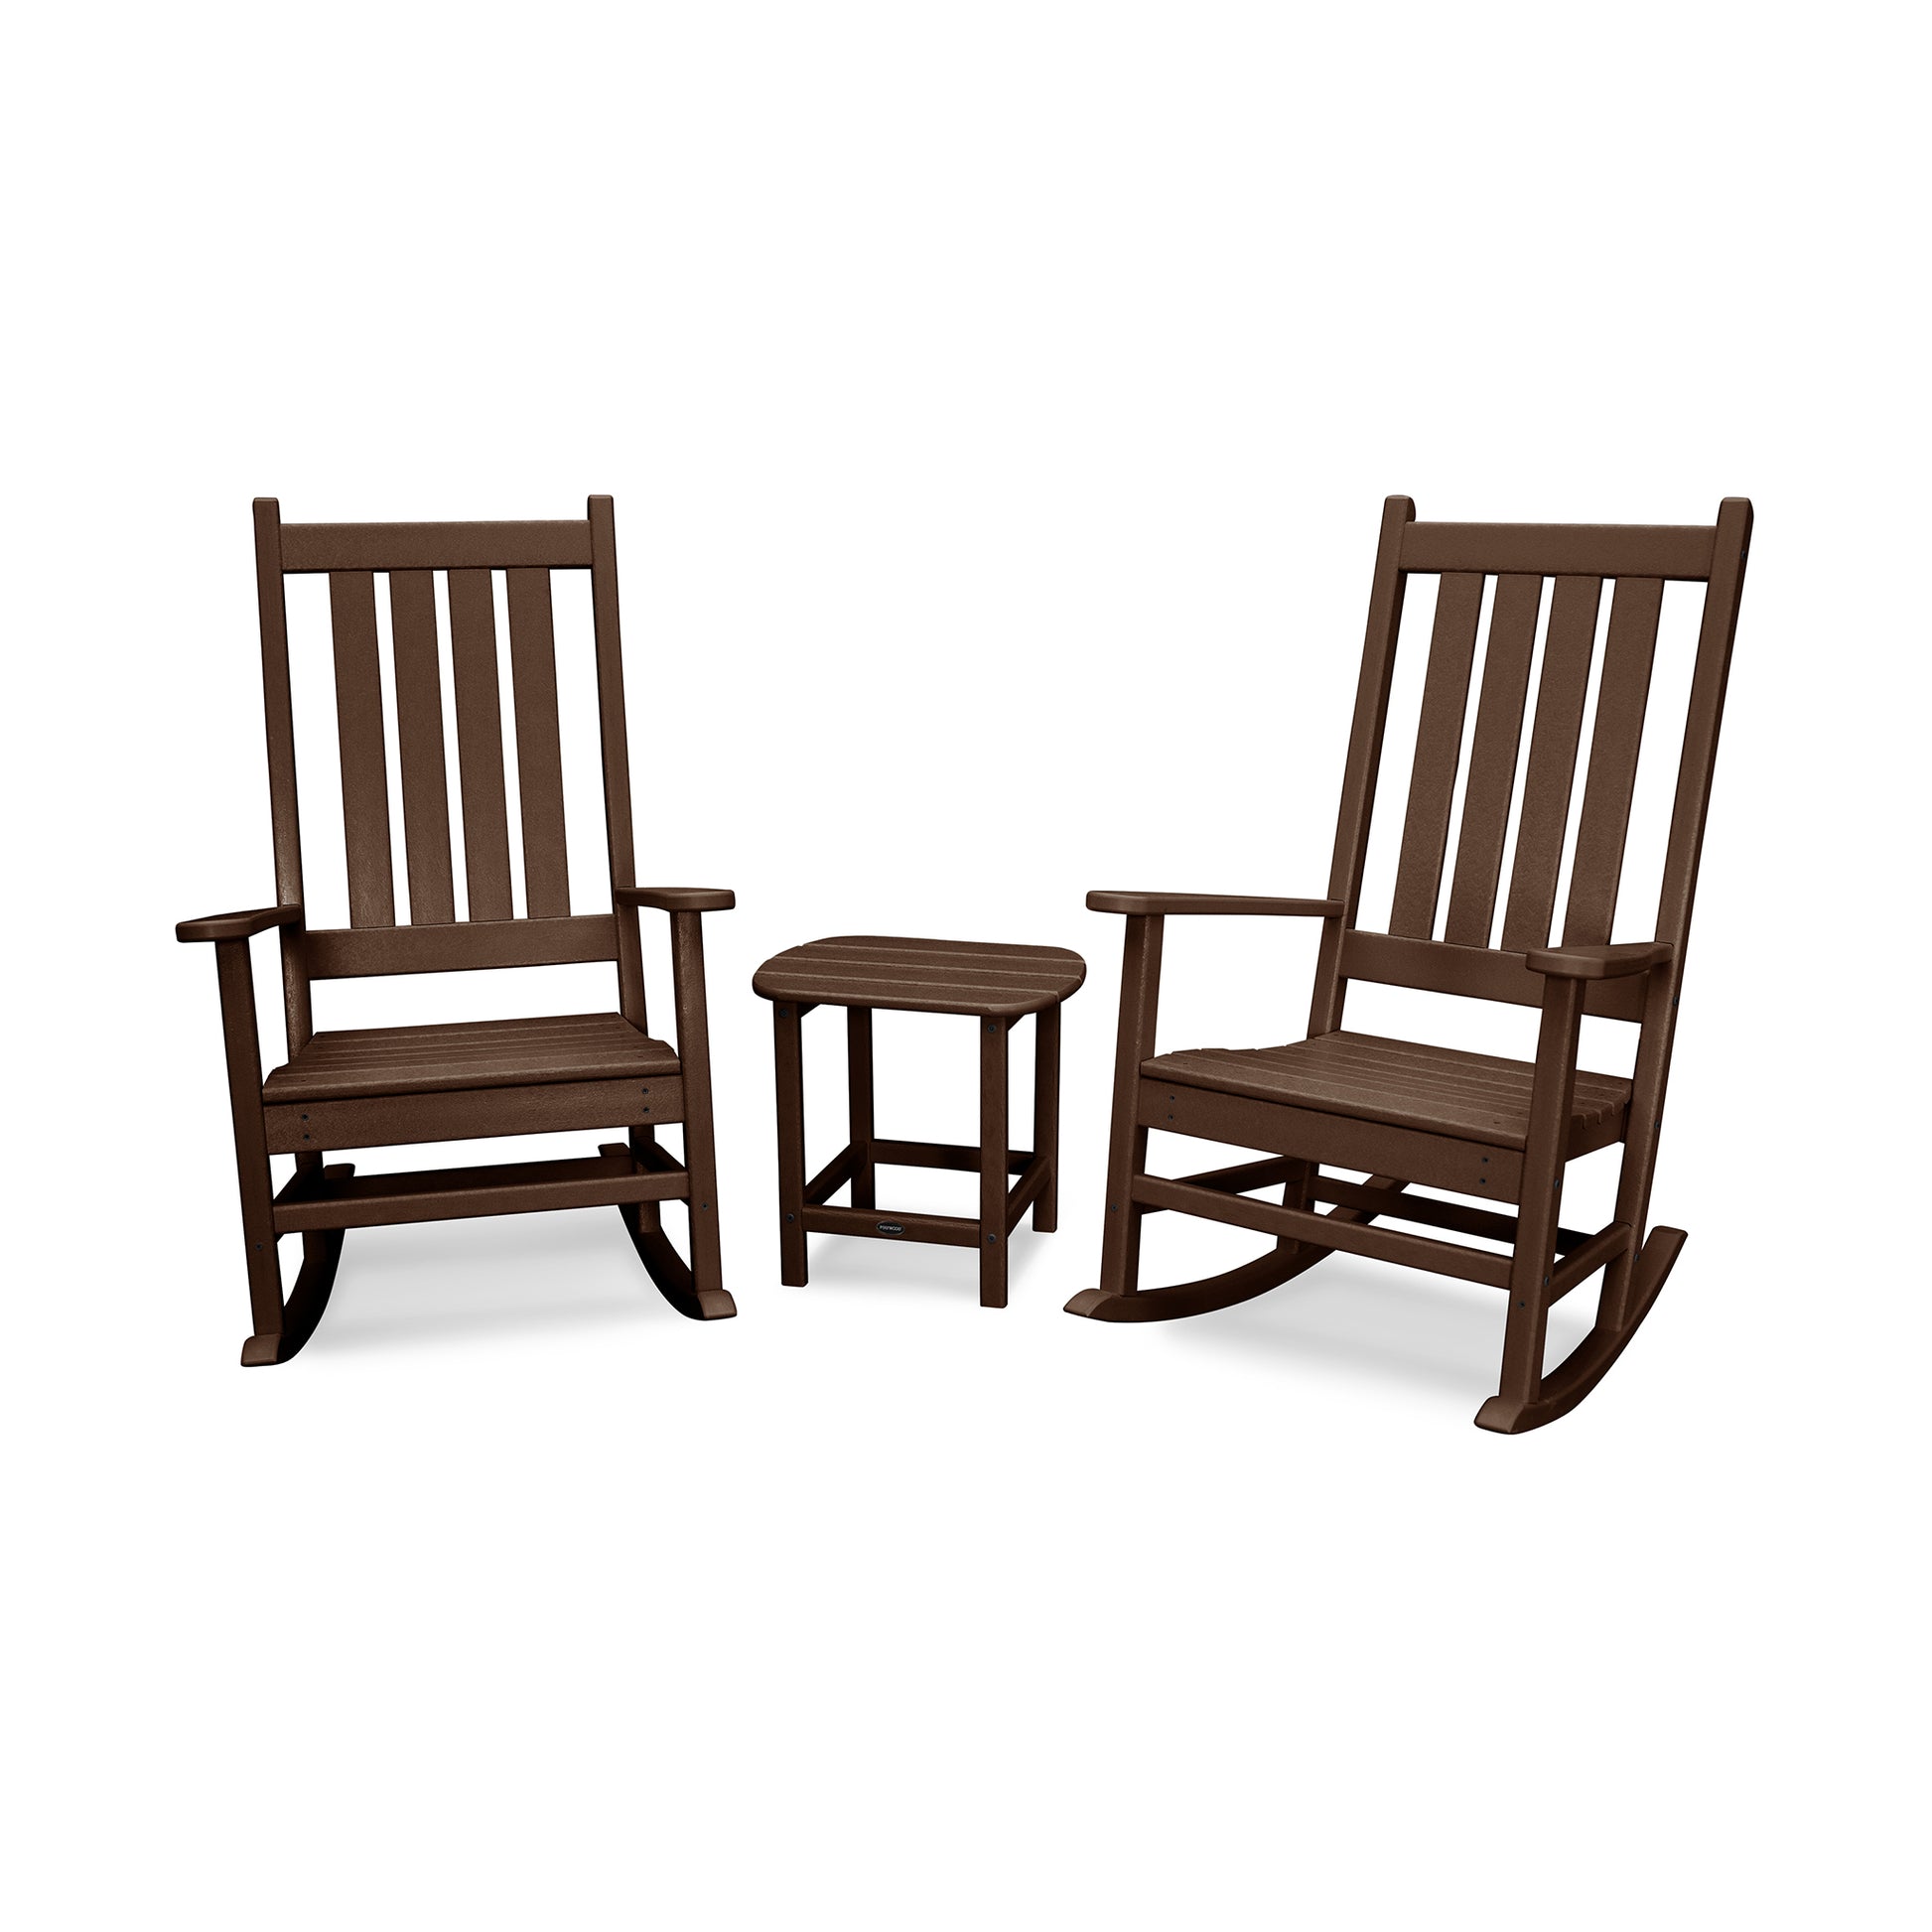 Two brown POLYWOOD® Vineyard 3-Piece Rocking Sets with a small matching side table, isolated on a white background. The furniture has a traditional slatted design.